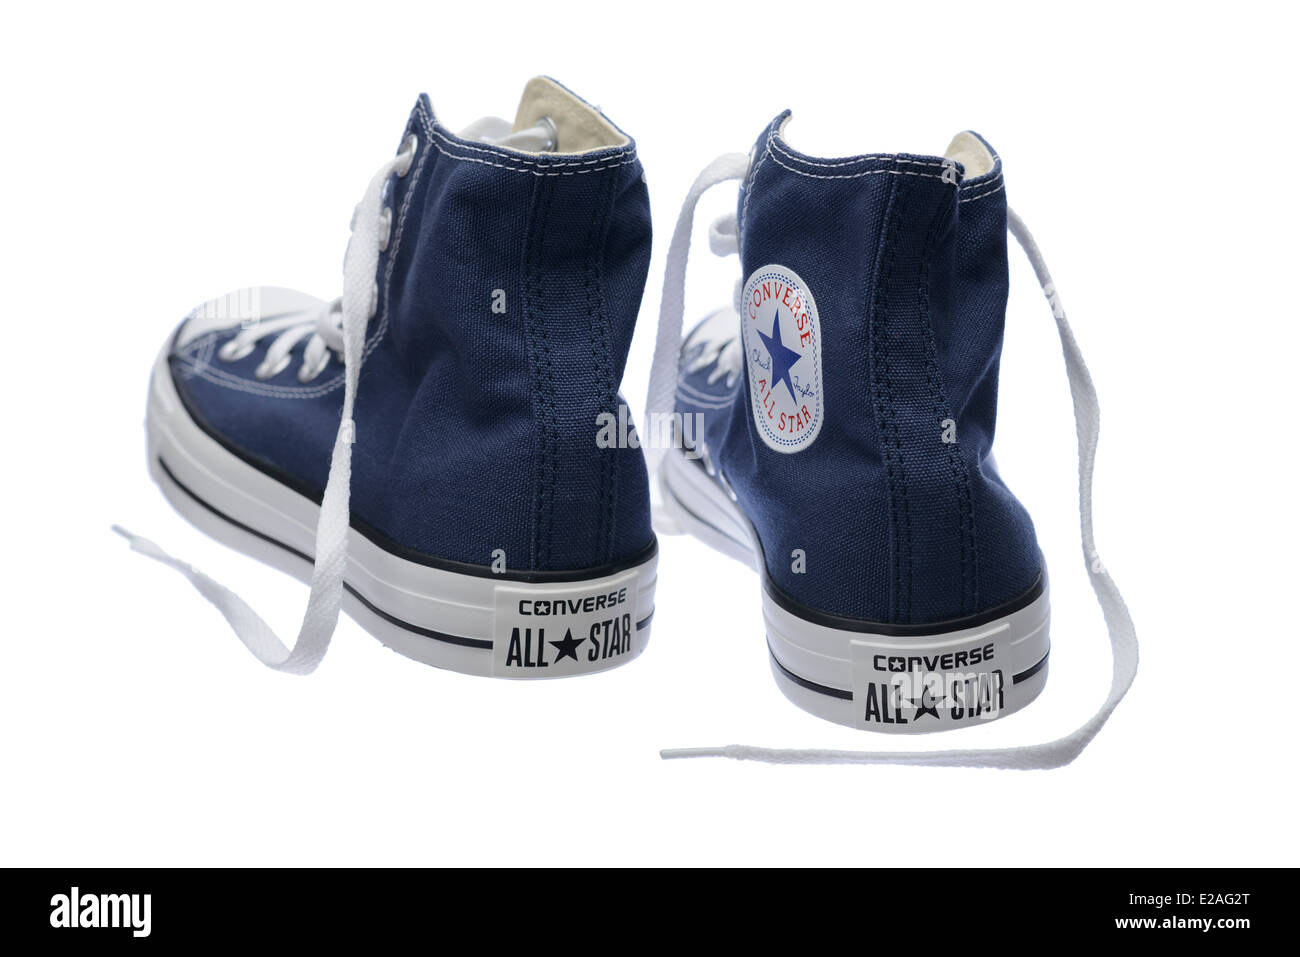 Blue Converse Chuck Taylor All Star shoe pair Stock Photo - Alamy